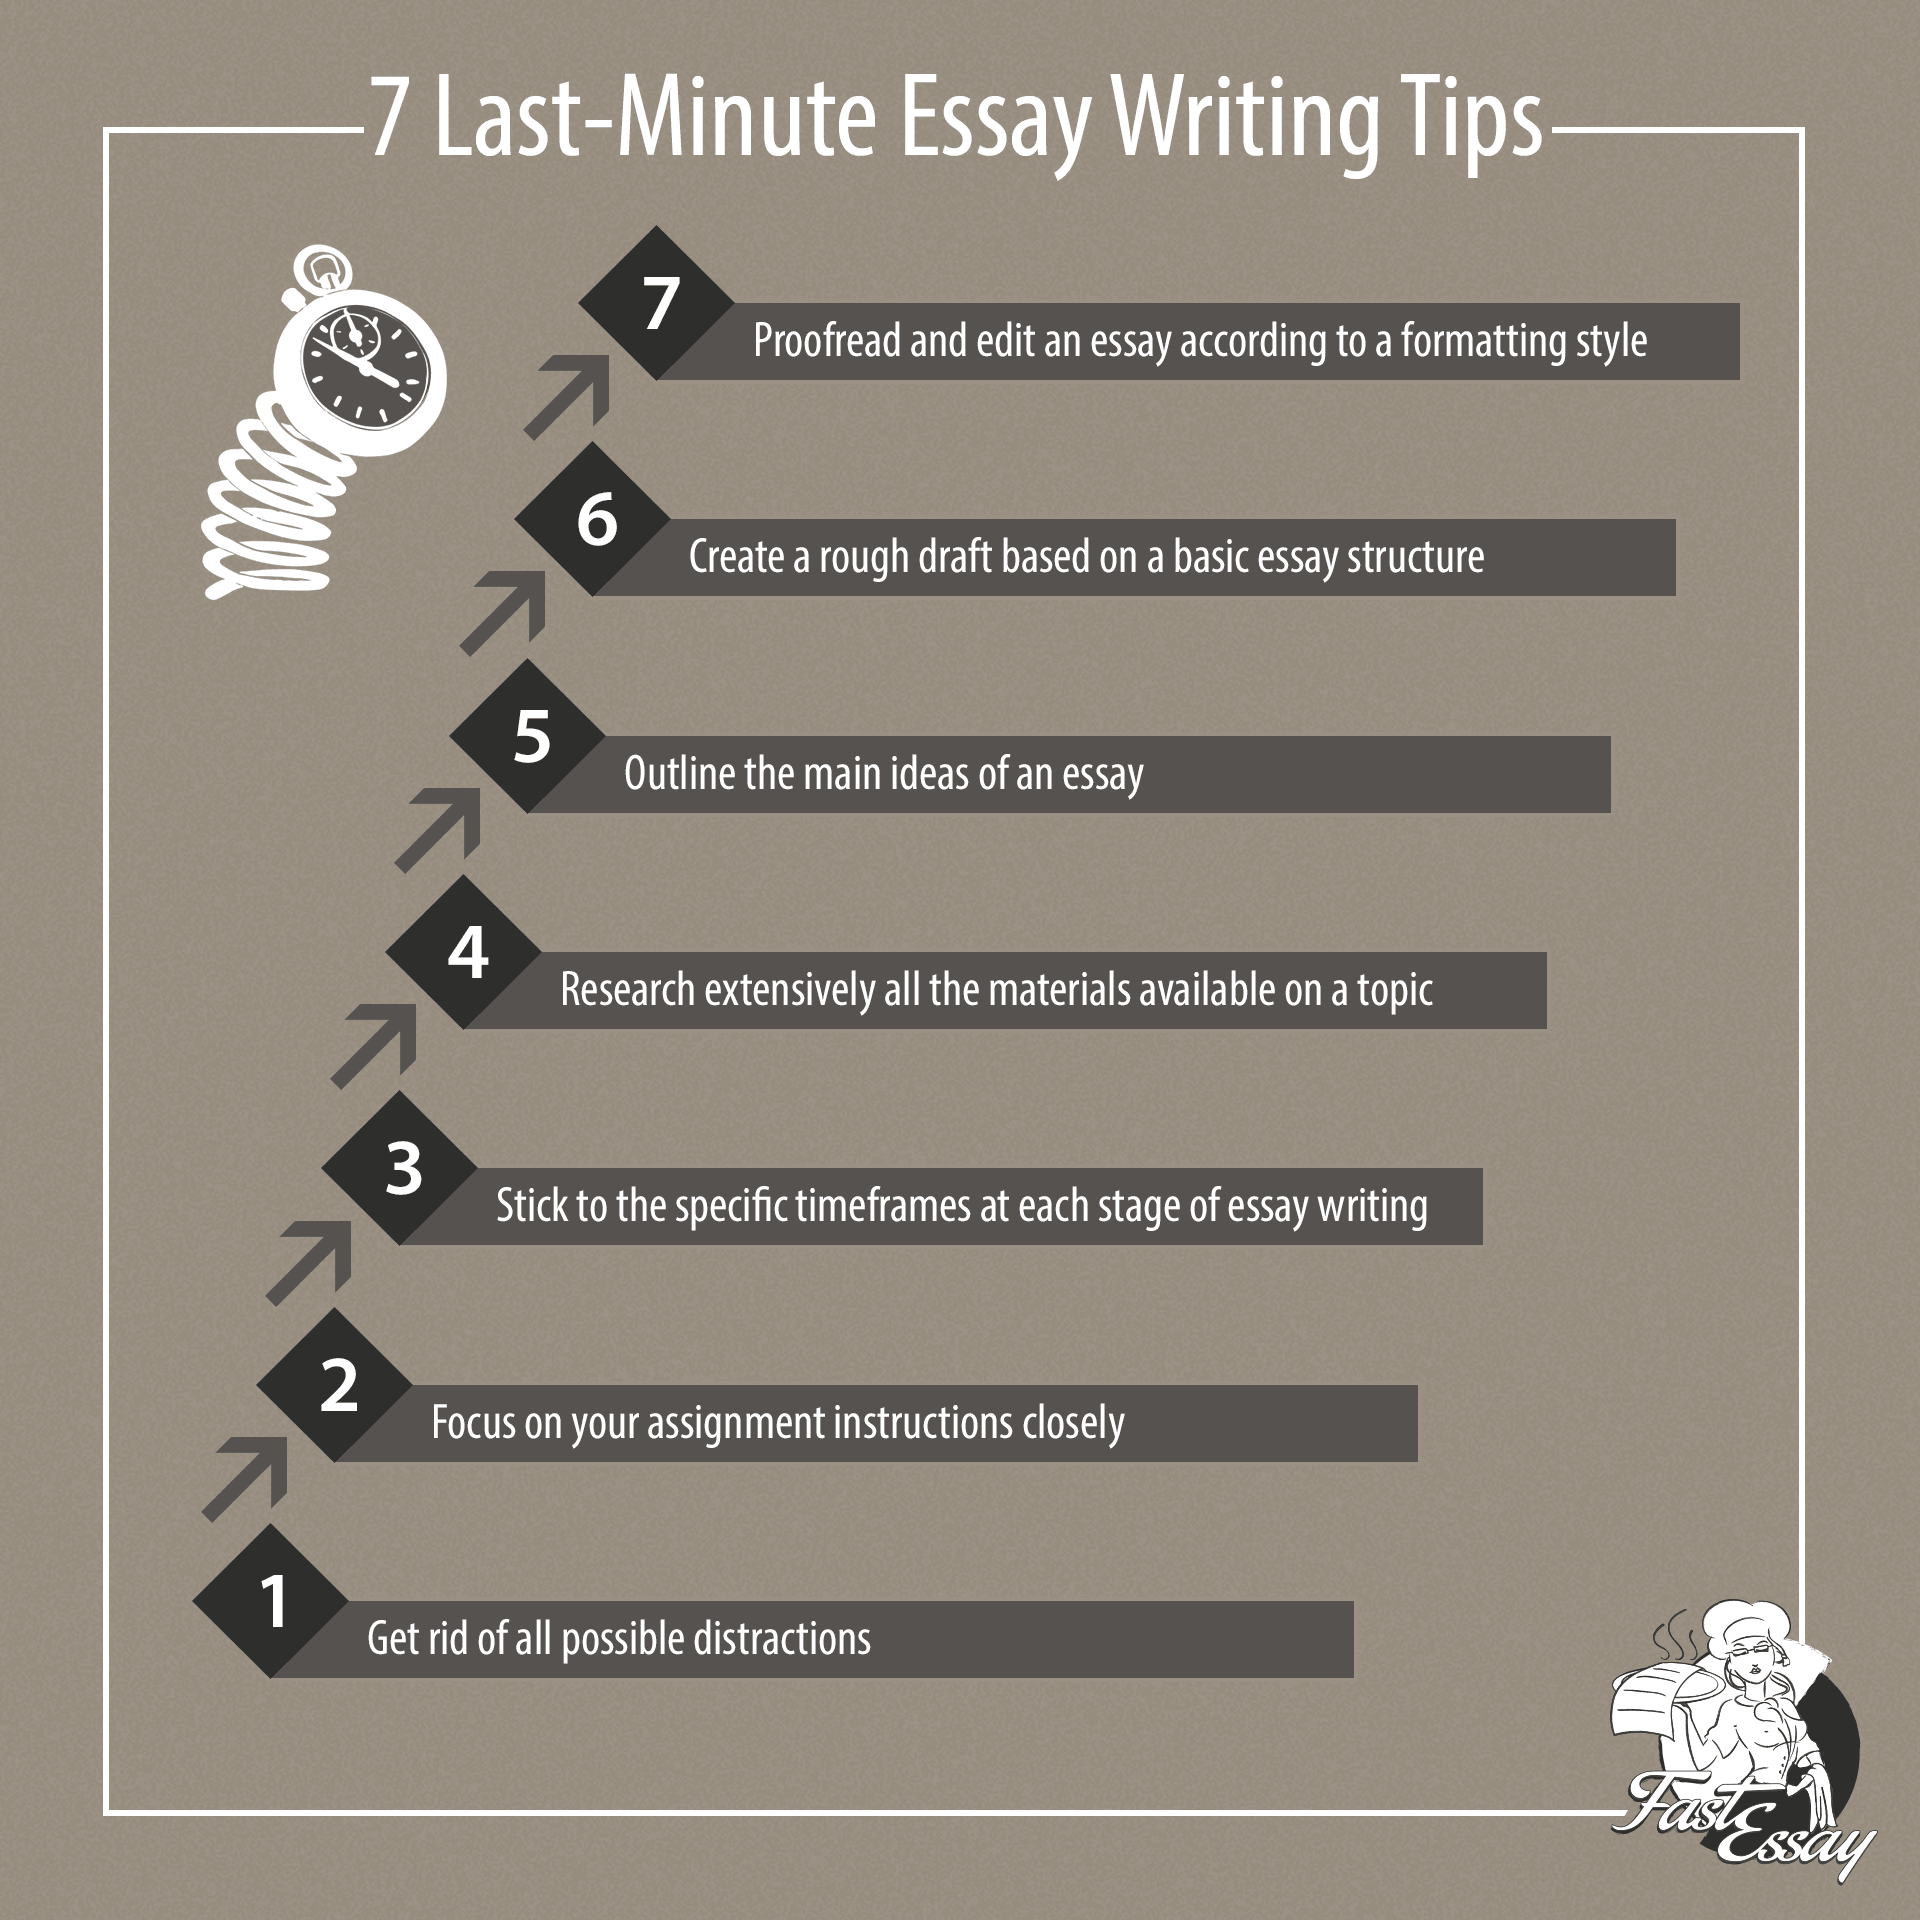 how to write an essay last minute reddit